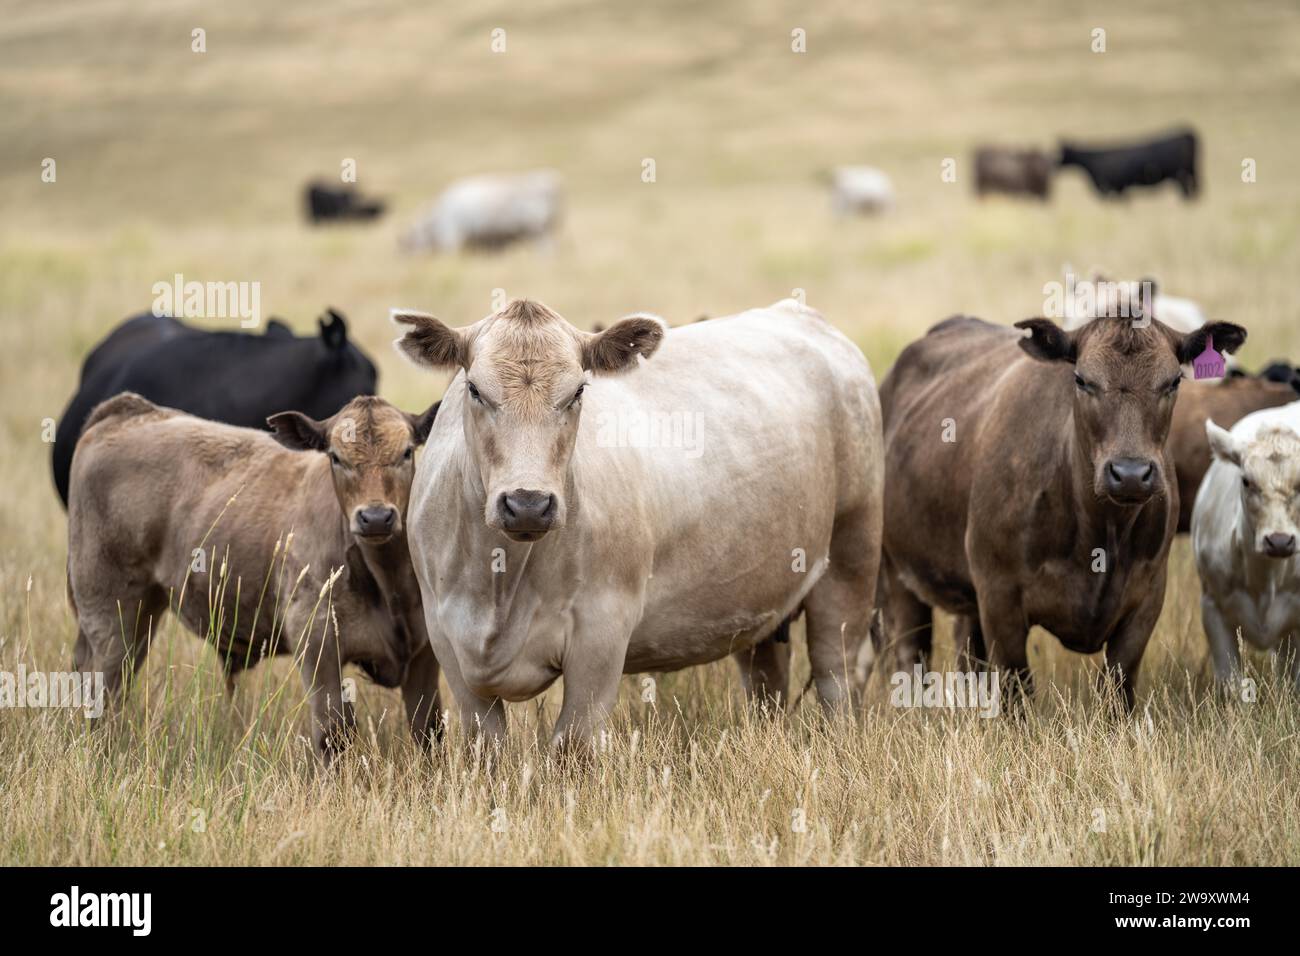 Stud Beef bulls and cows grazing on grass in a field, in Australia. eating hay and silage. breeds include murray grey, angus, brangus and wagyu. Stock Photo